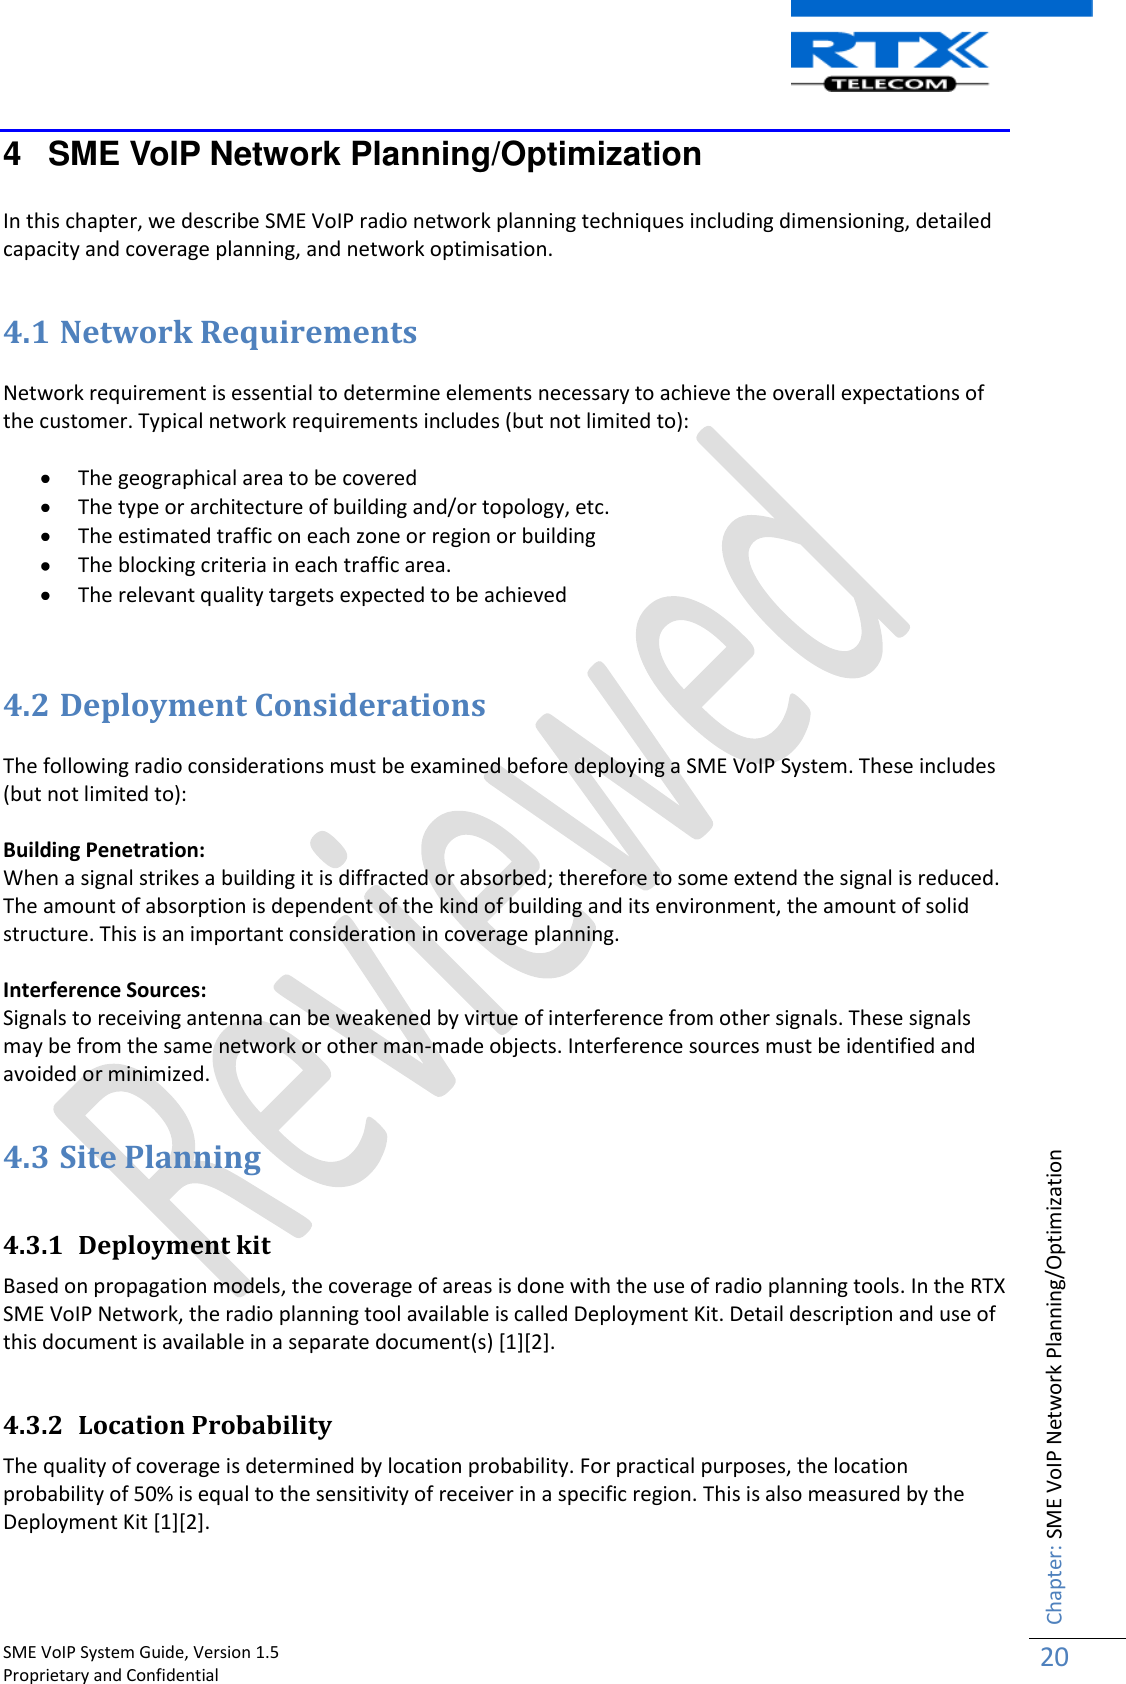    SME VoIP System Guide, Version 1.5                                                                                                                                                          Proprietary and Confidential    Chapter: SME VoIP Network Planning/Optimization 20  4  SME VoIP Network Planning/Optimization  In this chapter, we describe SME VoIP radio network planning techniques including dimensioning, detailed capacity and coverage planning, and network optimisation.  4.1 Network Requirements  Network requirement is essential to determine elements necessary to achieve the overall expectations of the customer. Typical network requirements includes (but not limited to):   The geographical area to be covered  The type or architecture of building and/or topology, etc.  The estimated traffic on each zone or region or building  The blocking criteria in each traffic area.  The relevant quality targets expected to be achieved   4.2 Deployment Considerations  The following radio considerations must be examined before deploying a SME VoIP System. These includes (but not limited to):  Building Penetration:  When a signal strikes a building it is diffracted or absorbed; therefore to some extend the signal is reduced. The amount of absorption is dependent of the kind of building and its environment, the amount of solid structure. This is an important consideration in coverage planning.  Interference Sources: Signals to receiving antenna can be weakened by virtue of interference from other signals. These signals may be from the same network or other man-made objects. Interference sources must be identified and avoided or minimized.  4.3 Site Planning   4.3.1 Deployment kit Based on propagation models, the coverage of areas is done with the use of radio planning tools. In the RTX SME VoIP Network, the radio planning tool available is called Deployment Kit. Detail description and use of this document is available in a separate document(s) [1][2].  4.3.2 Location Probability The quality of coverage is determined by location probability. For practical purposes, the location probability of 50% is equal to the sensitivity of receiver in a specific region. This is also measured by the Deployment Kit [1][2].  